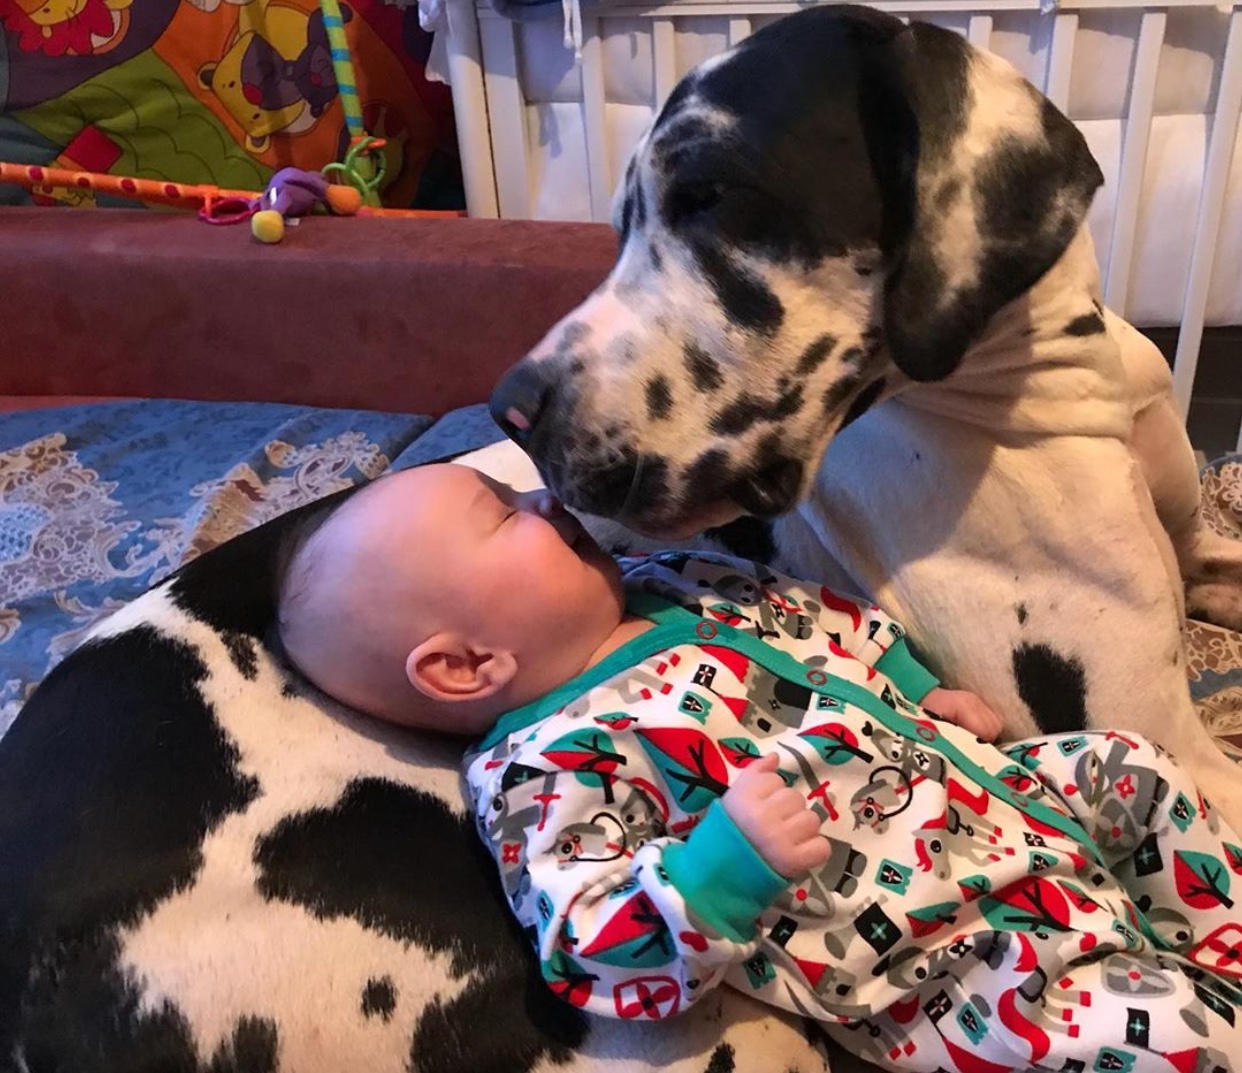 A Great Dane lying on the couch with a baby lying on its body